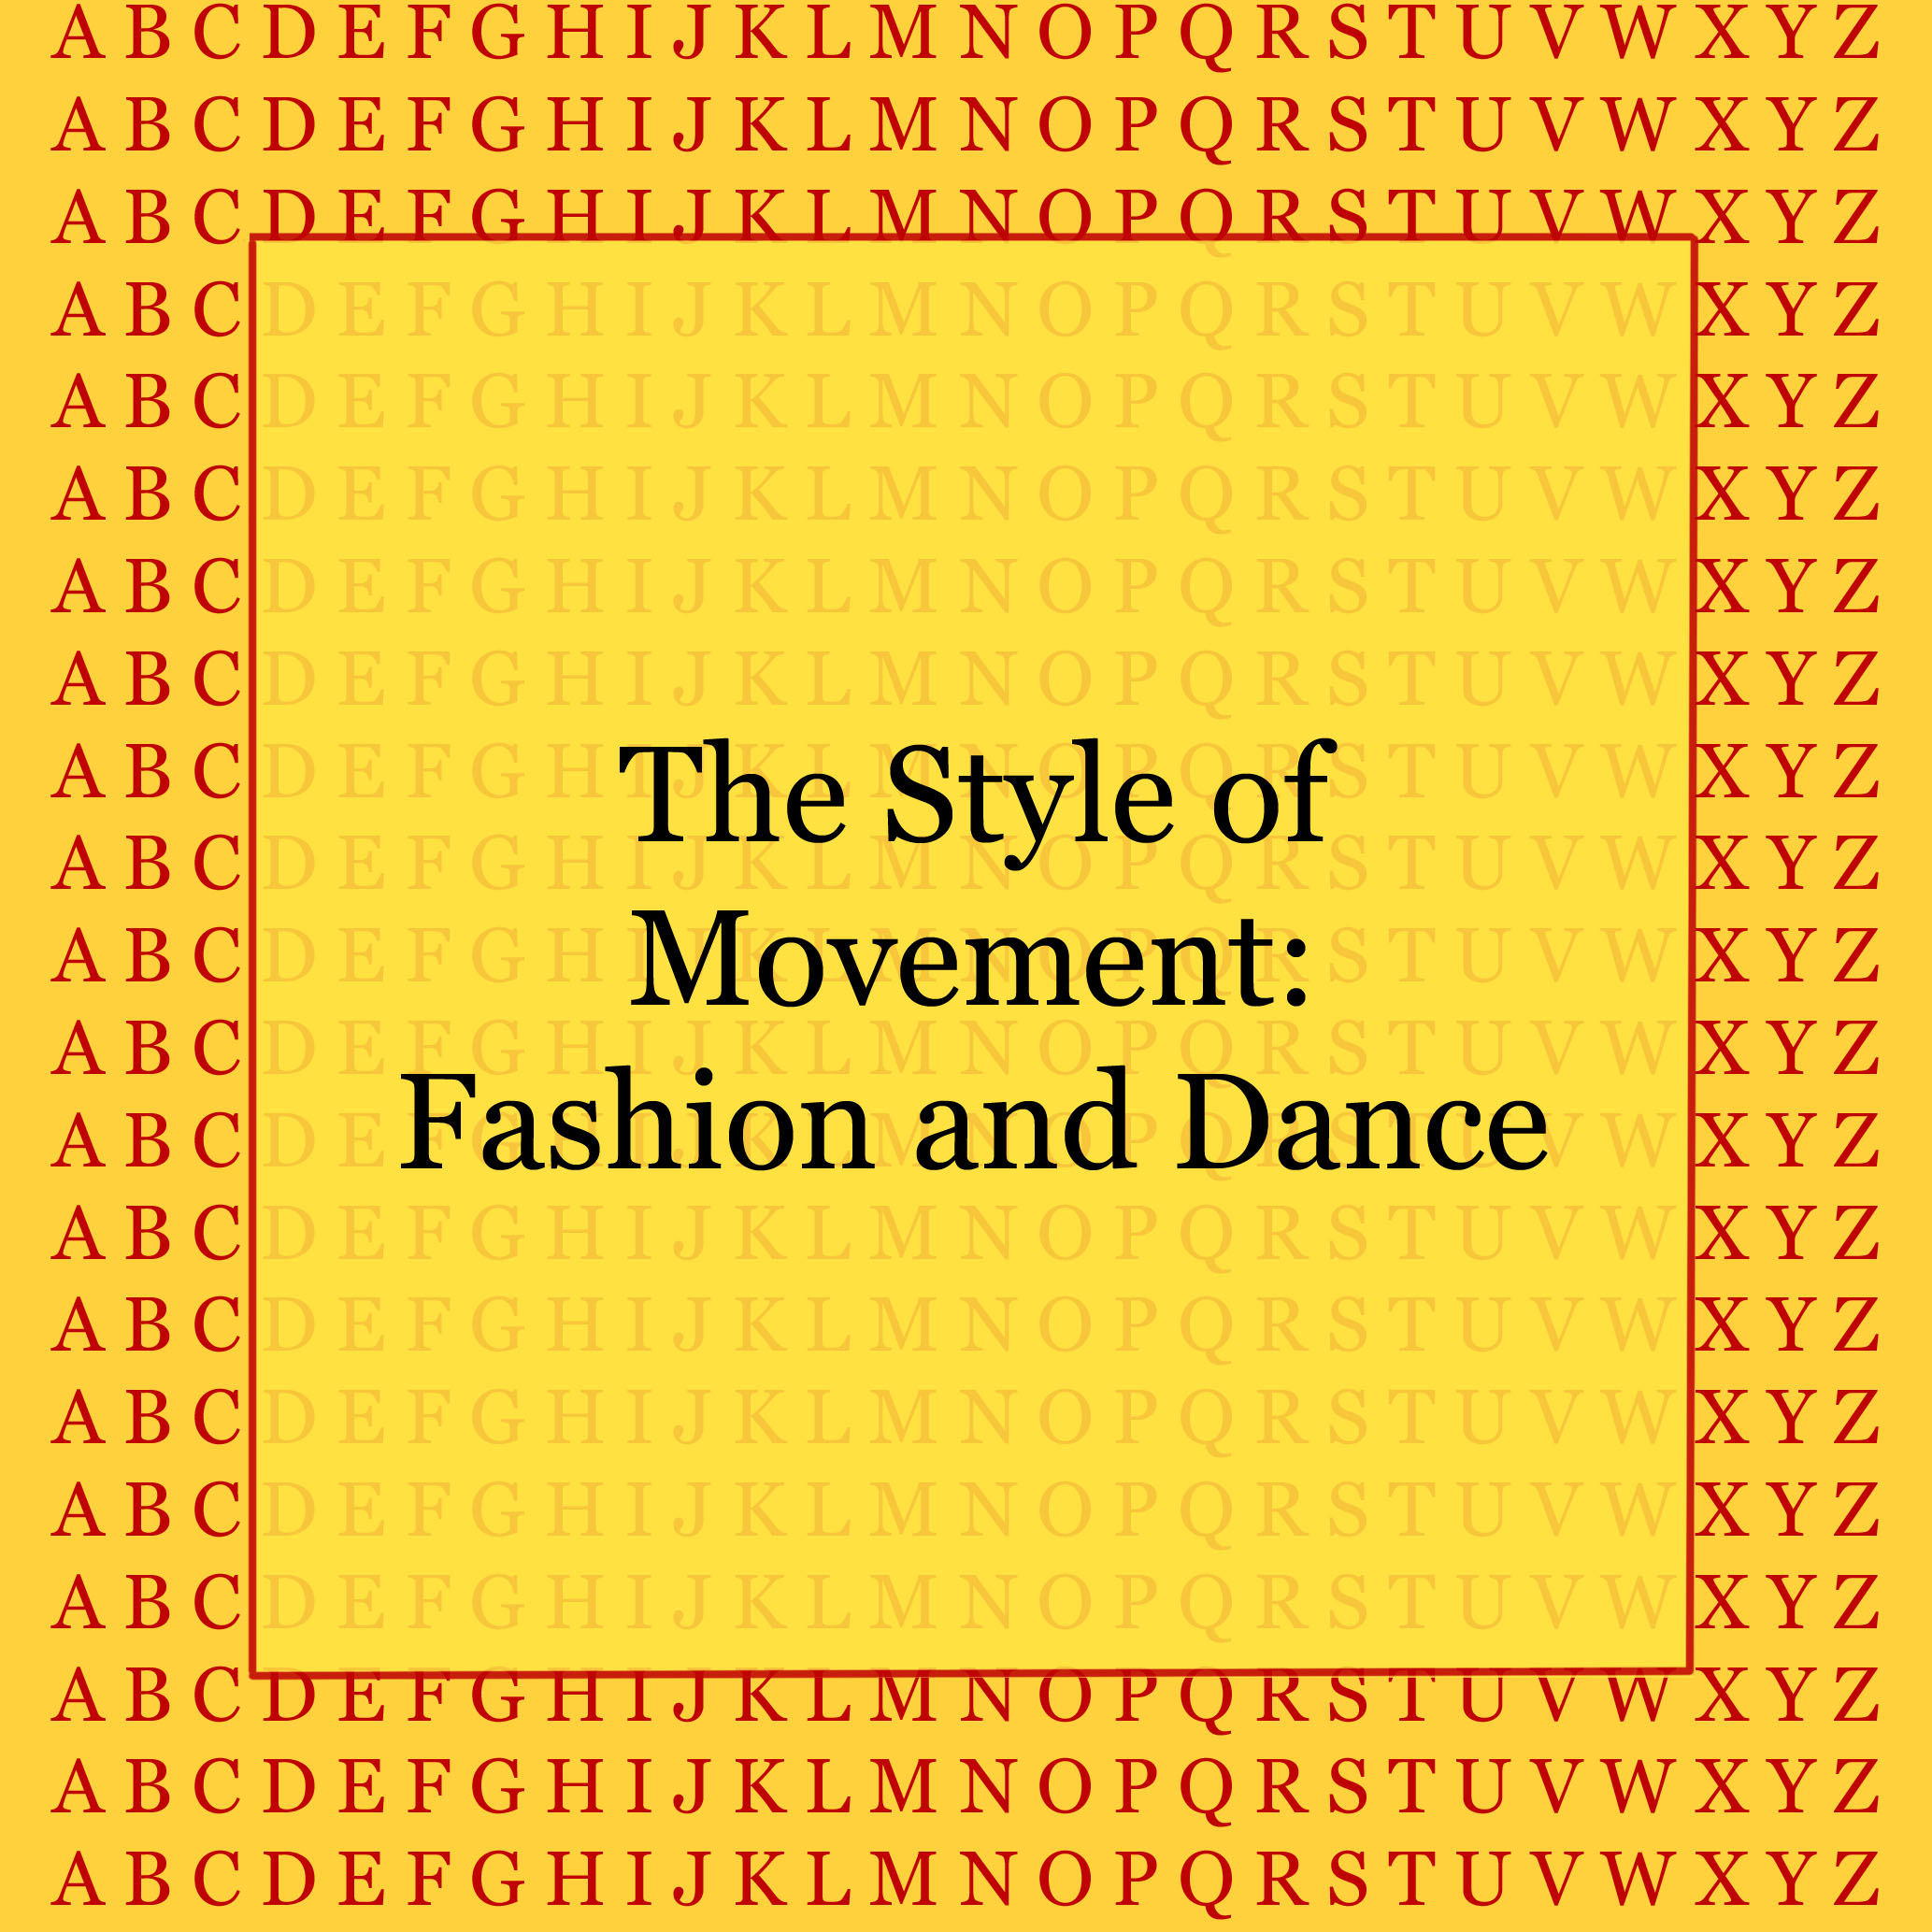 The Style of Movement - Fashion and Dance - kultur4all.de